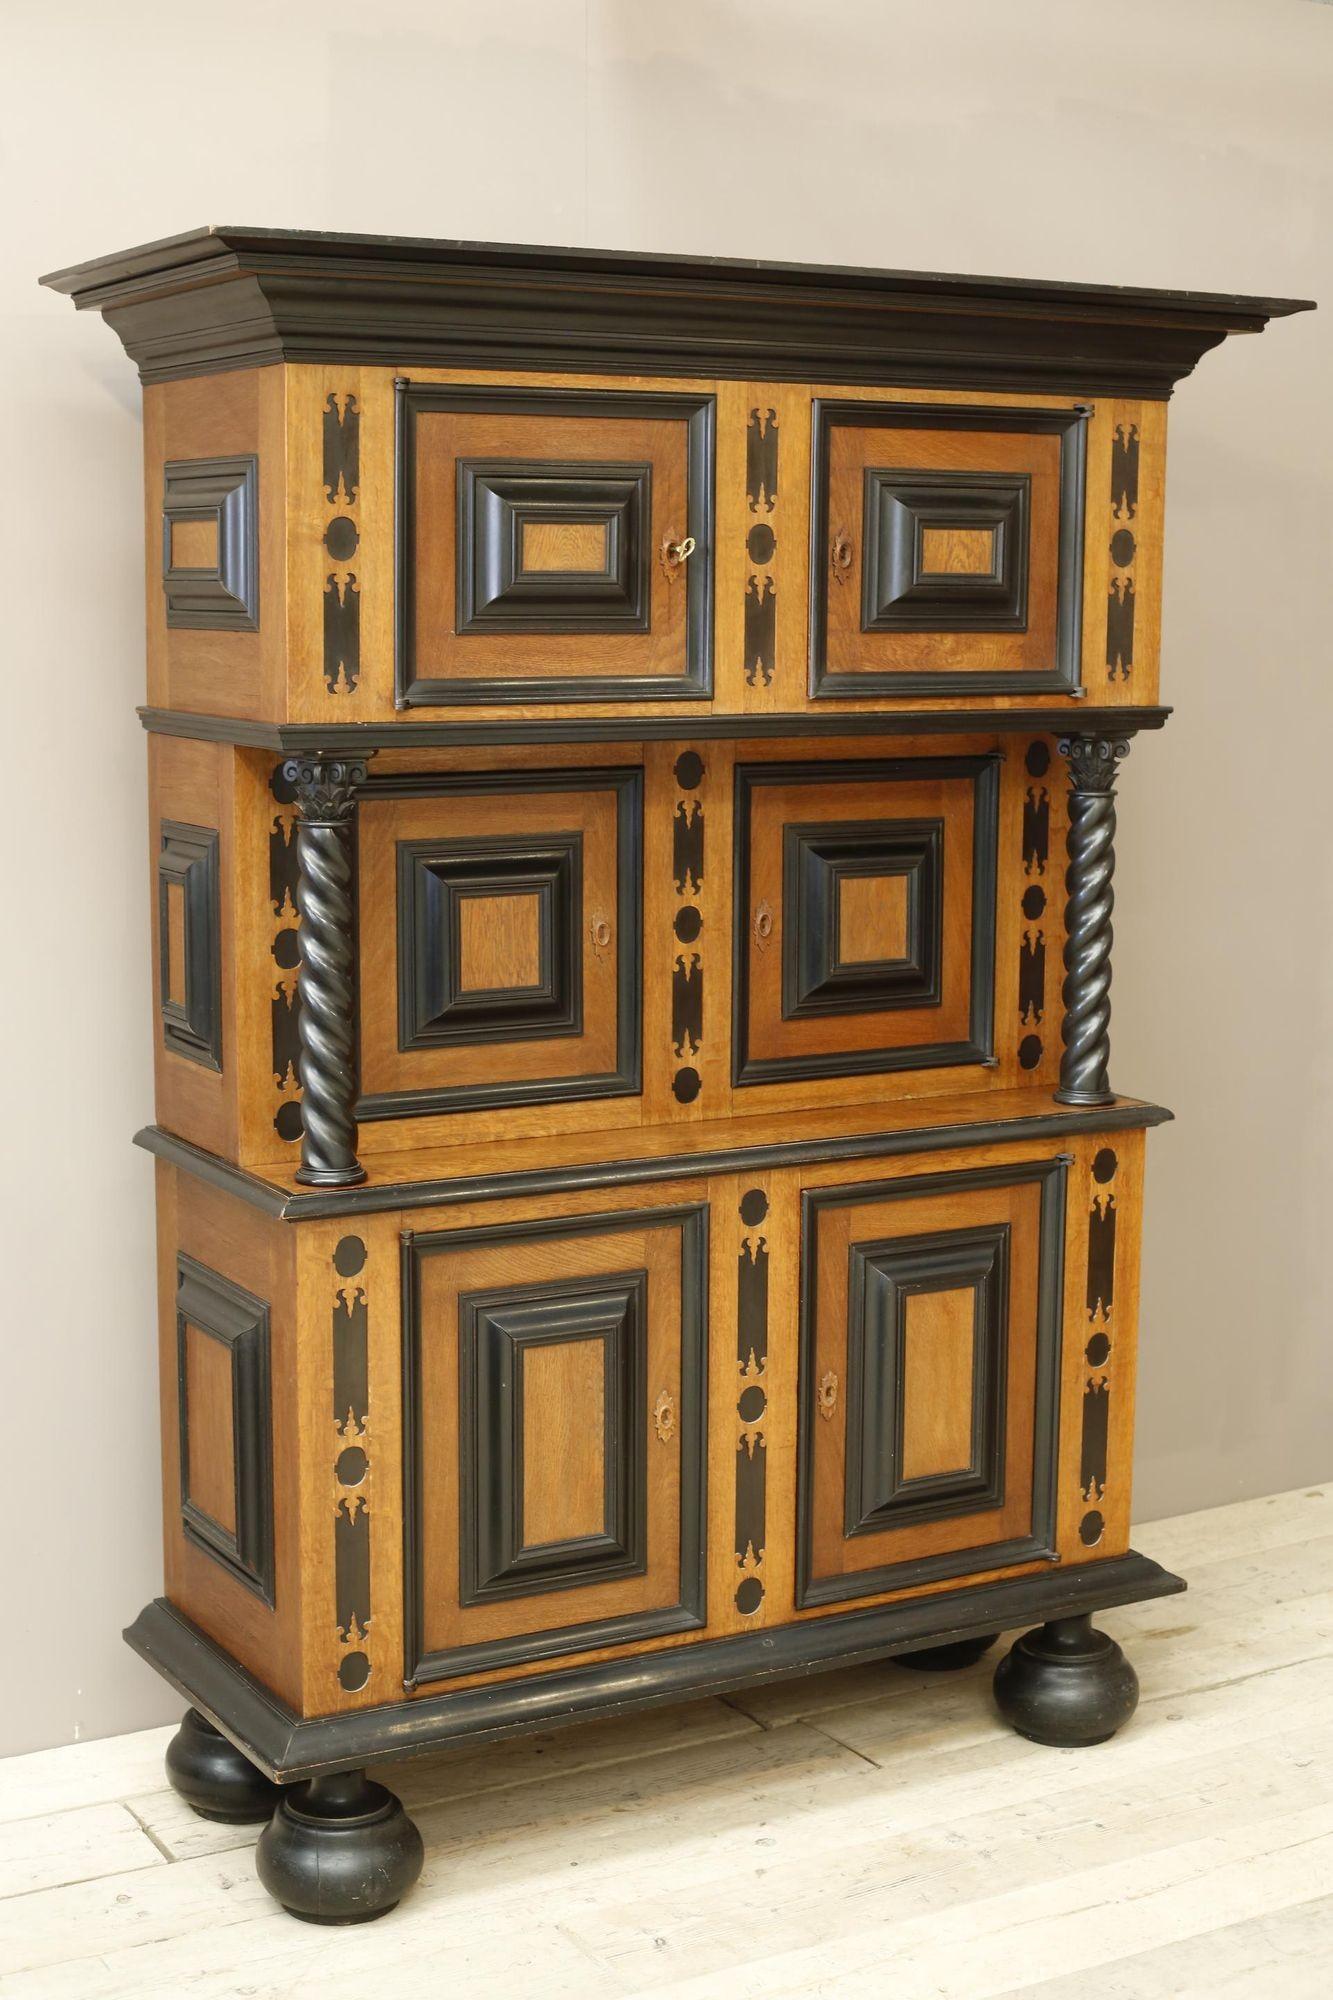 This is an incredibly striking 19th century Dutch cupboard. It is in 17th century style with a very impressive look. The whole piece is made from solid Oak with ebony and ebonised accents that set this piece off perfectly. The cupboard is in three